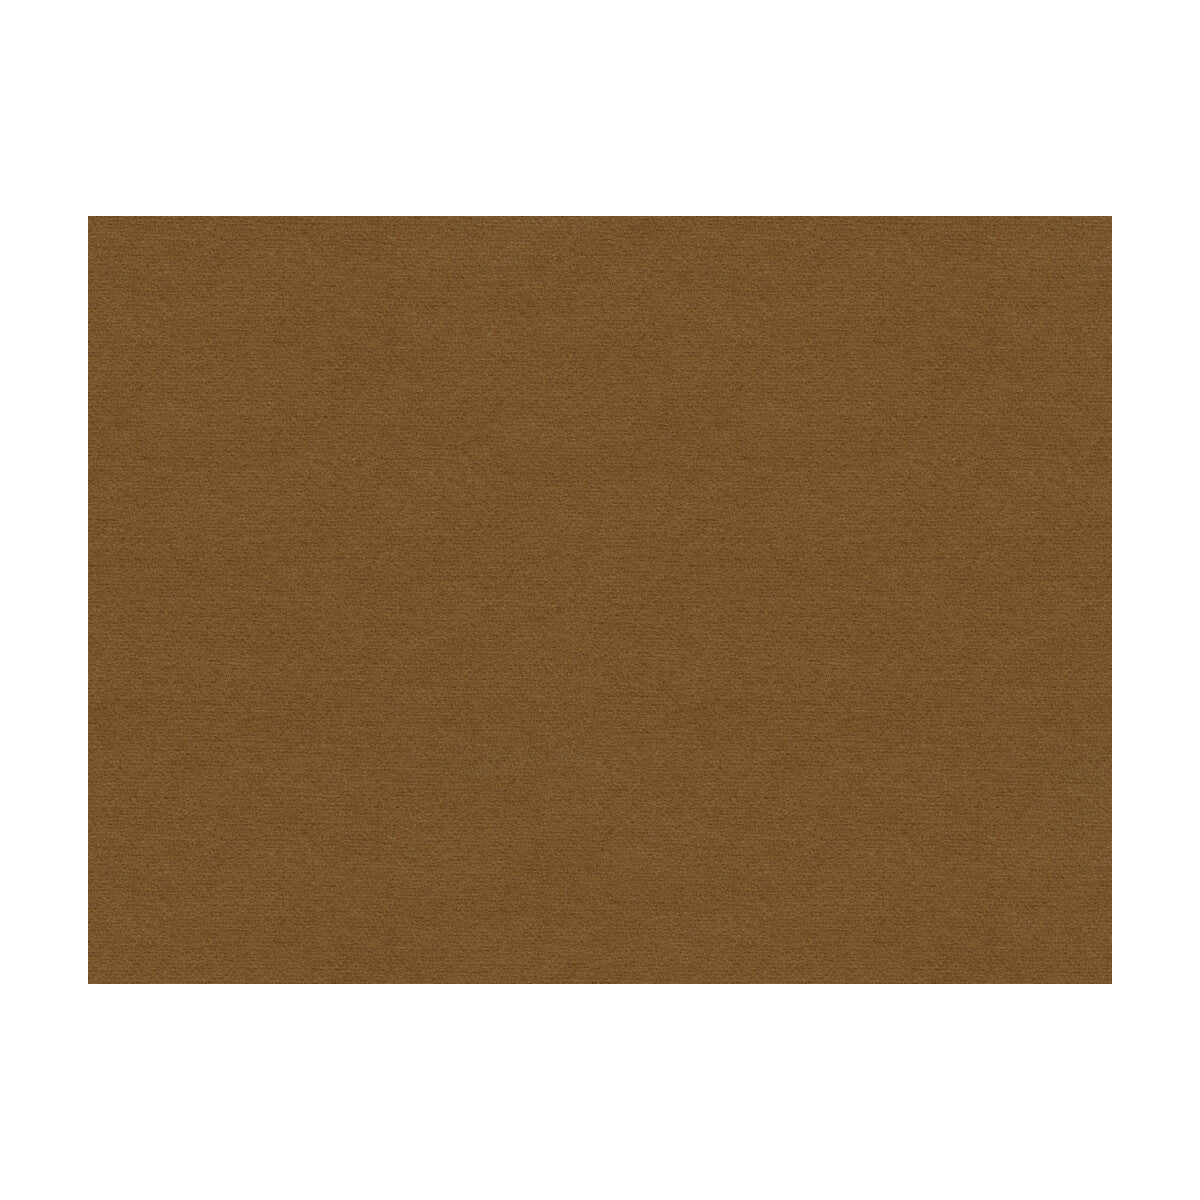 Chevalier Wool fabric in mocha color - pattern 8013149.6.0 - by Brunschwig &amp; Fils